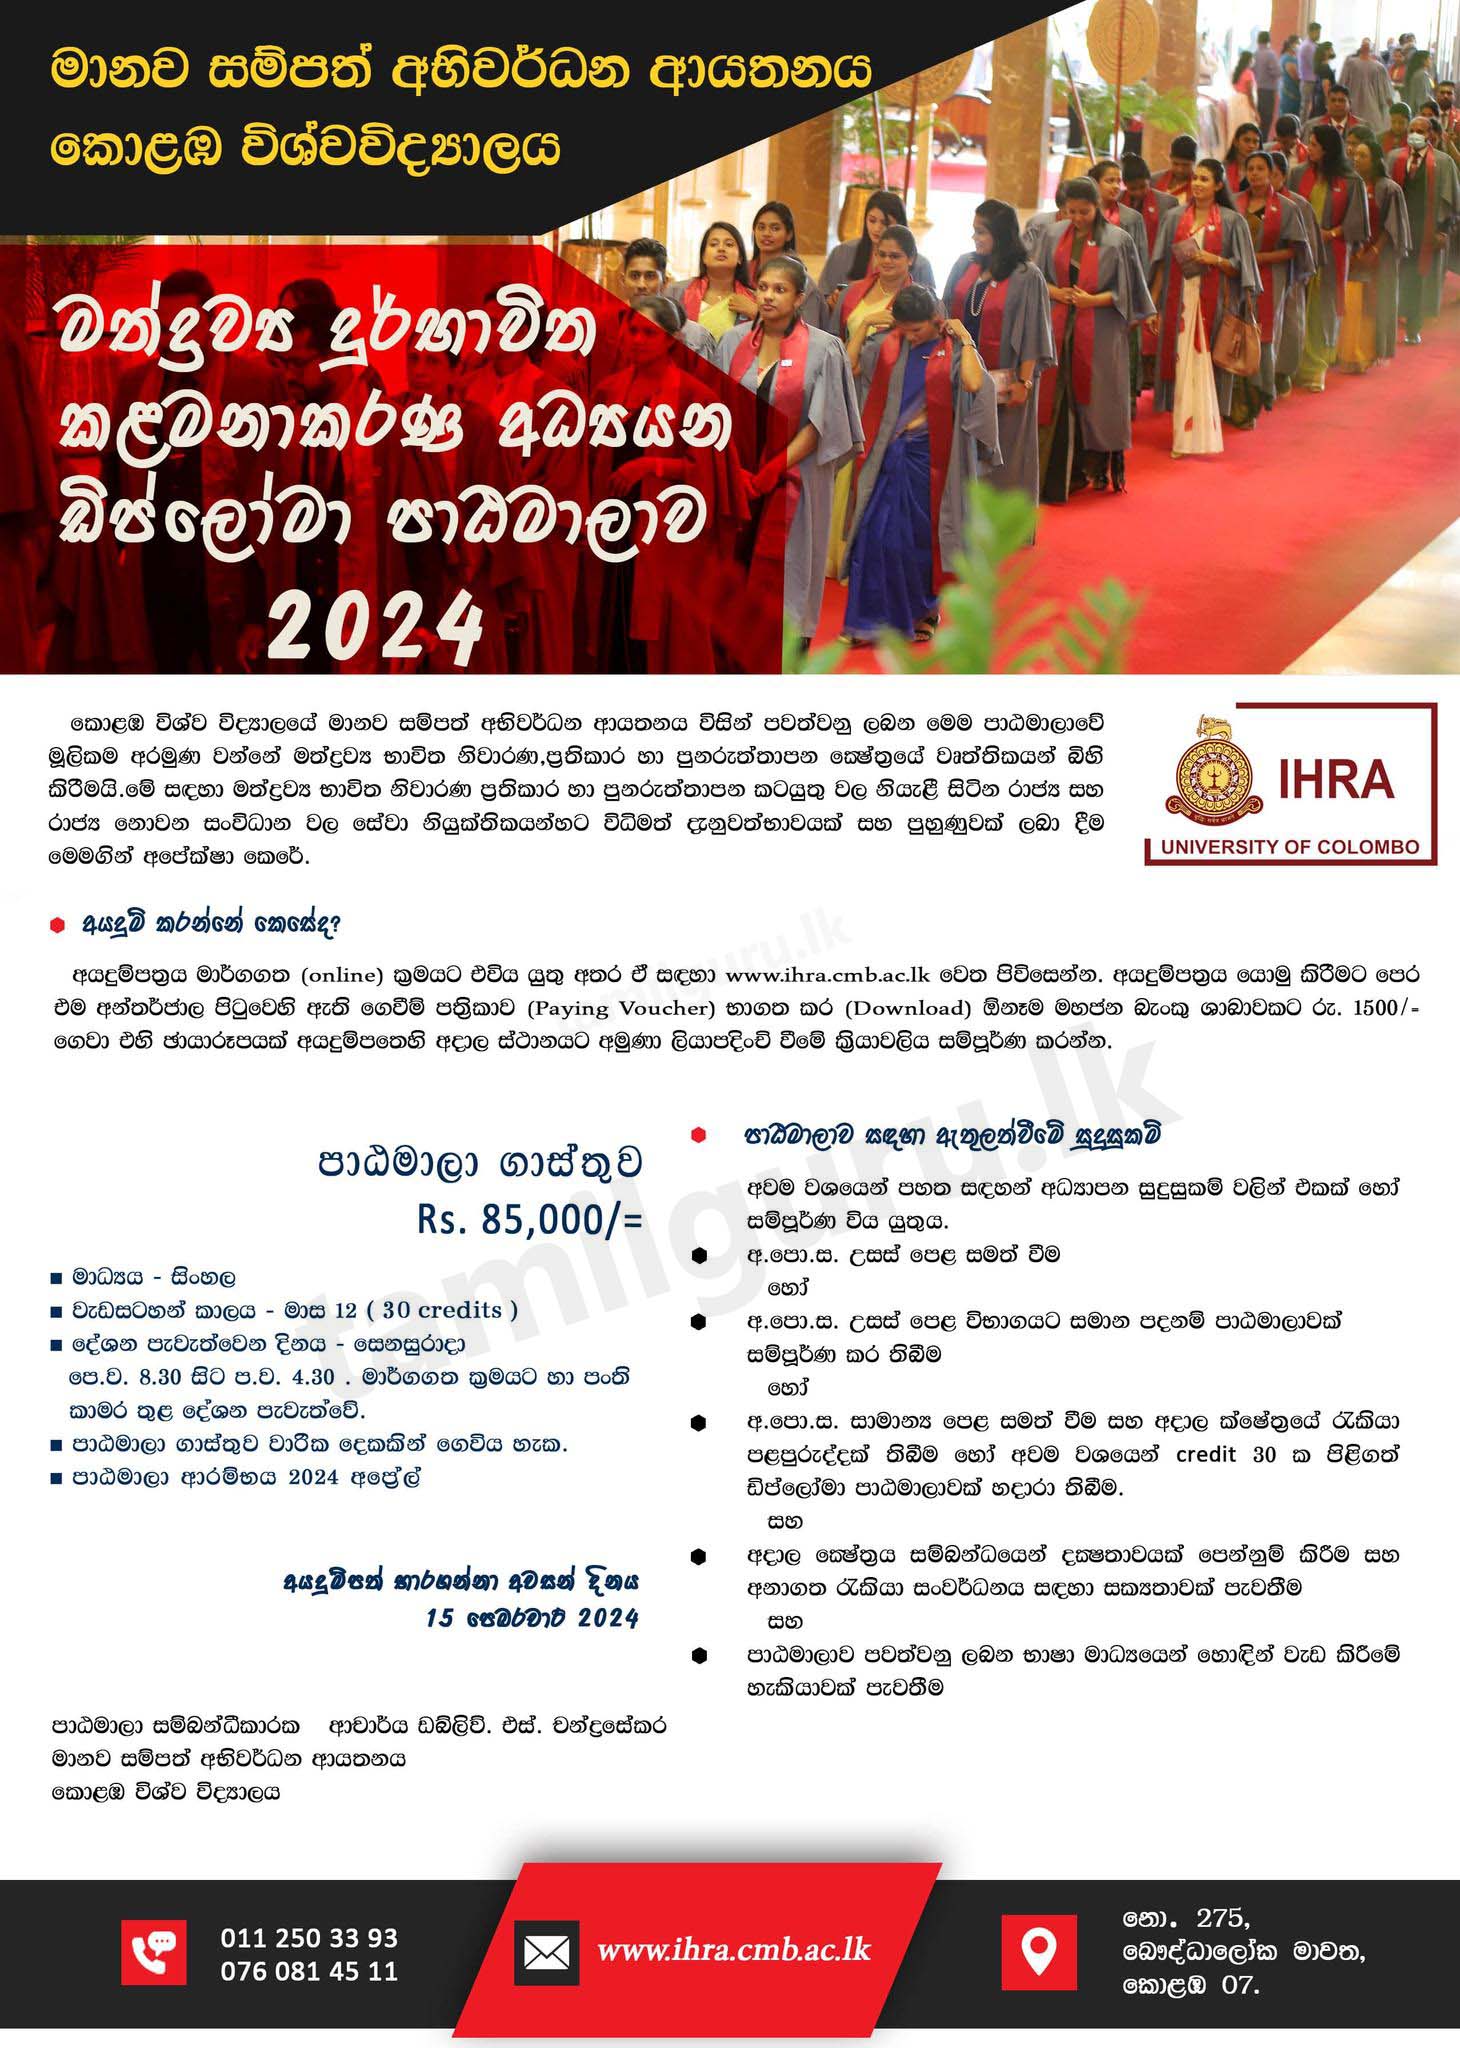 Diploma in Drugs Abuse Management Studies (DDAMS) 2024 - University of Colombo